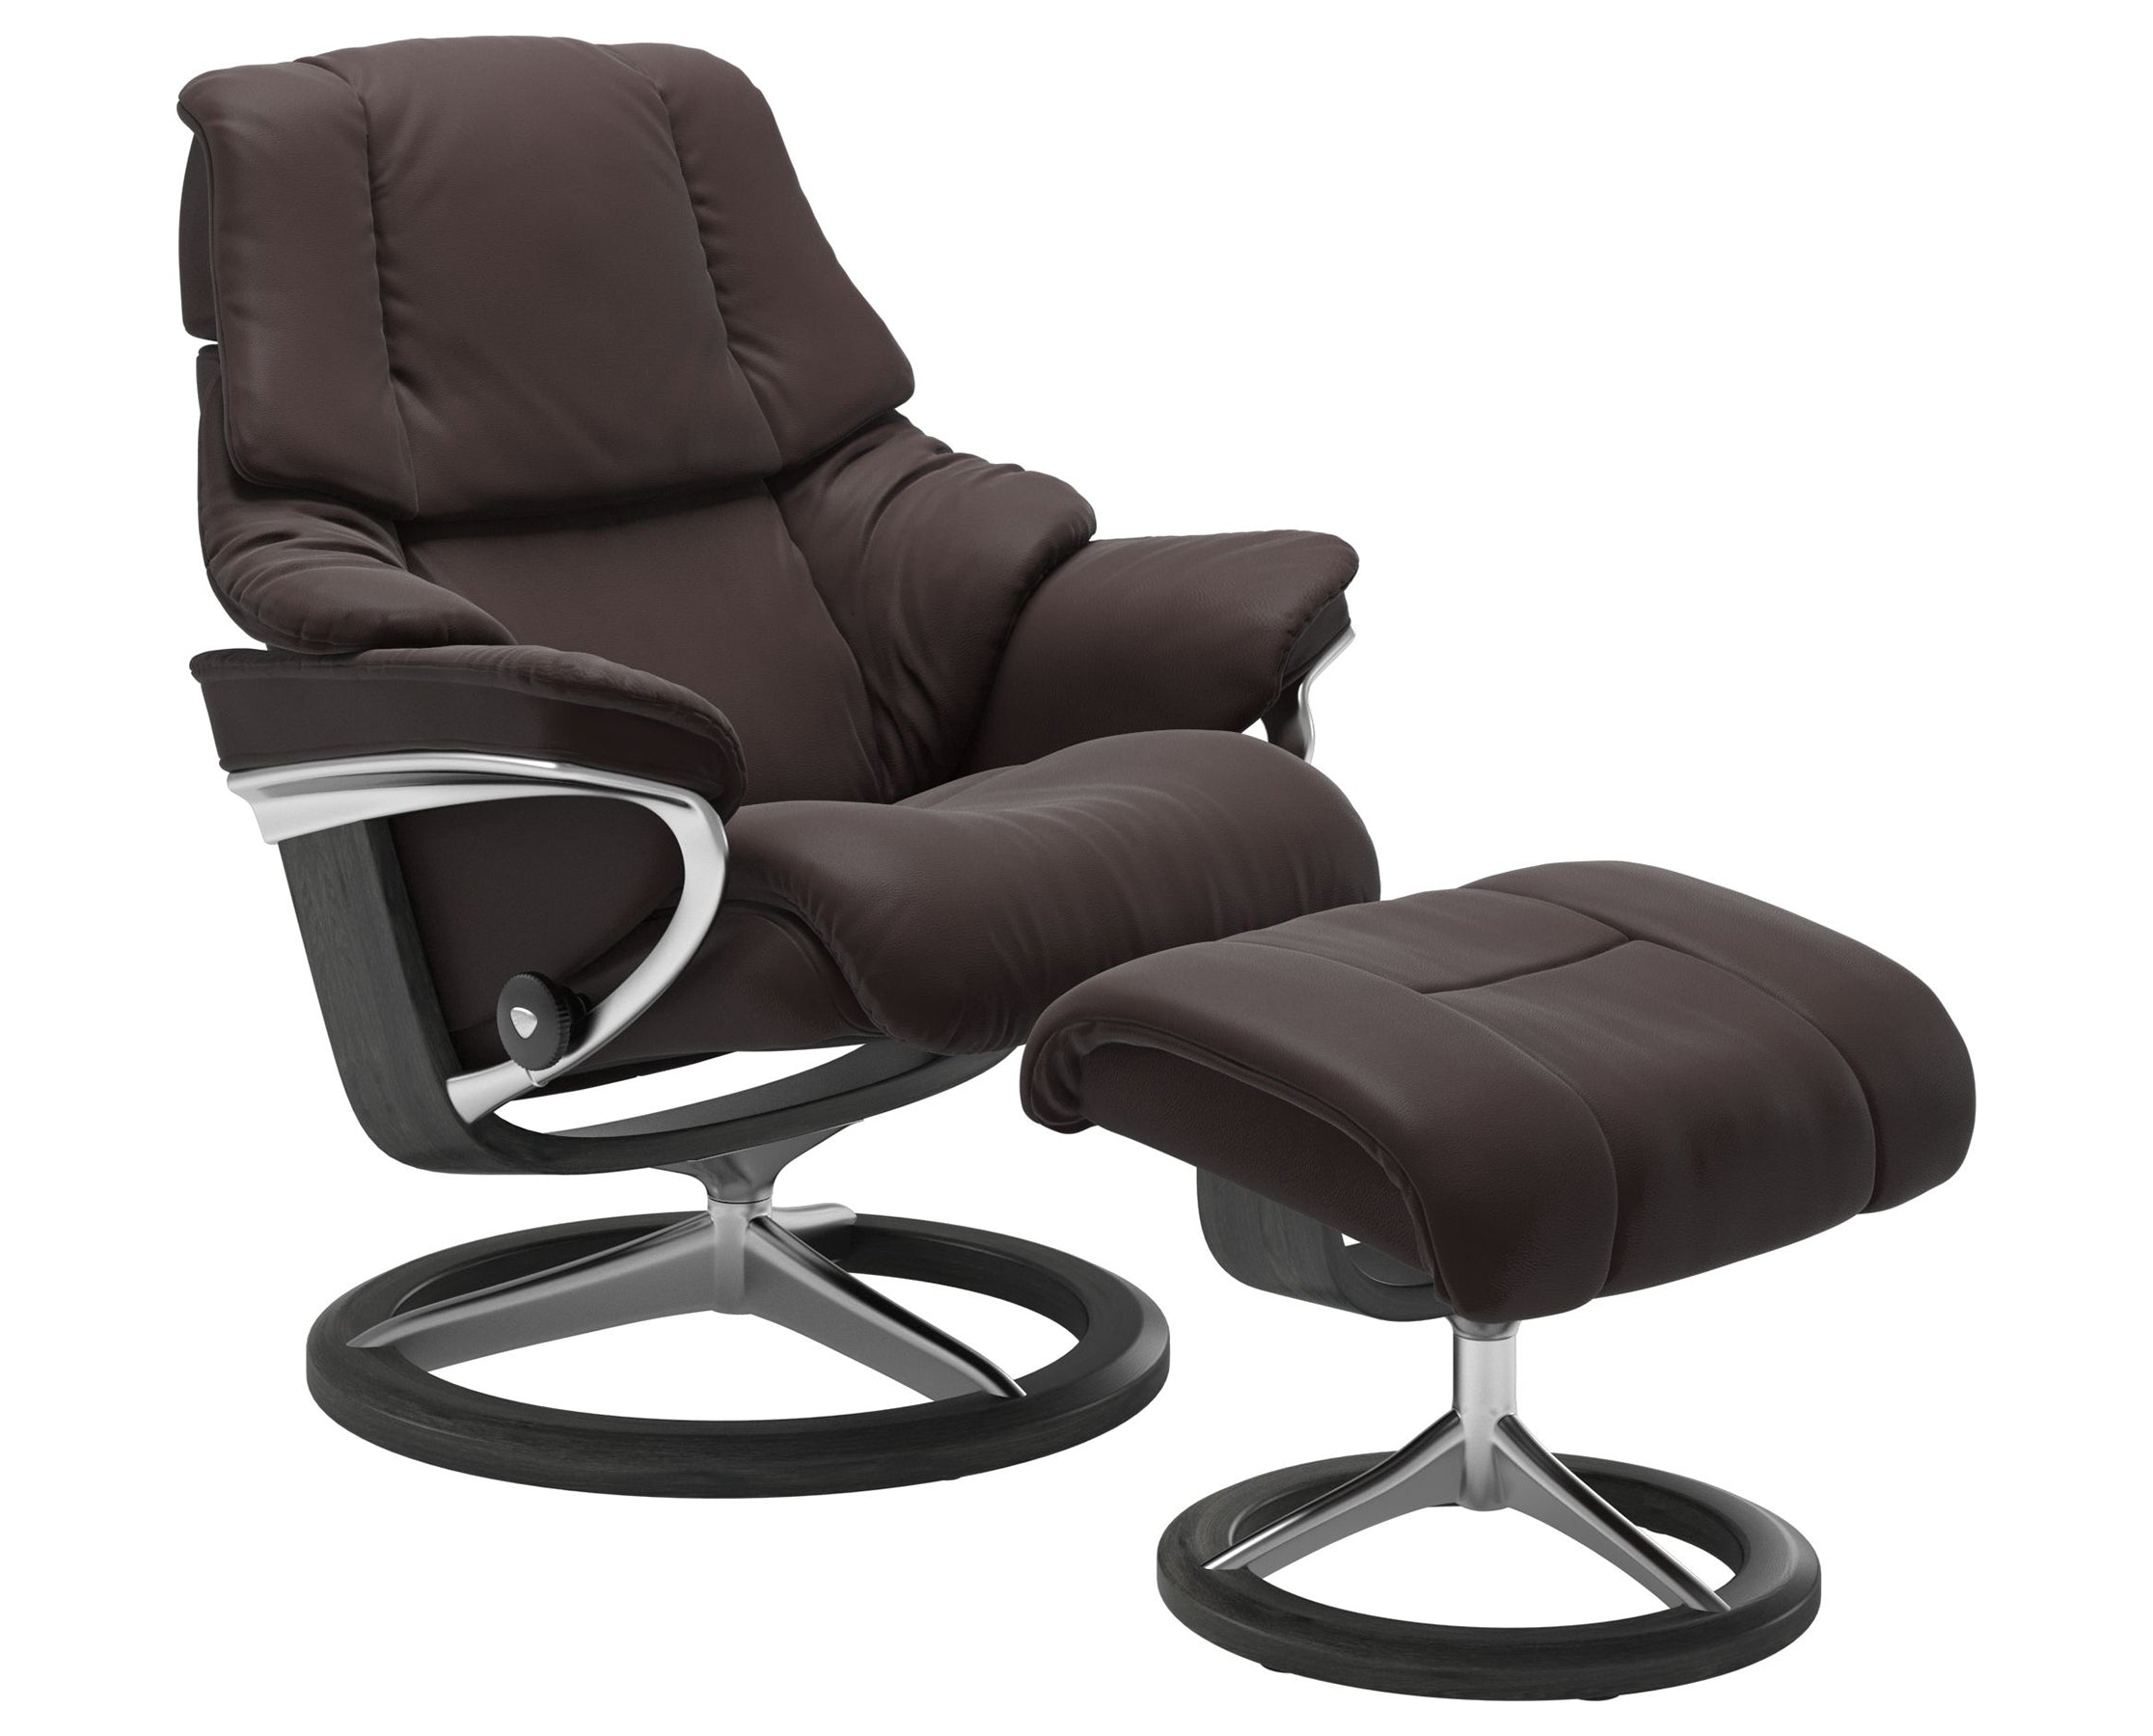 Paloma Leather Chocolate S/M/L and Grey Base | Stressless Reno Signature Recliner | Valley Ridge Furniture